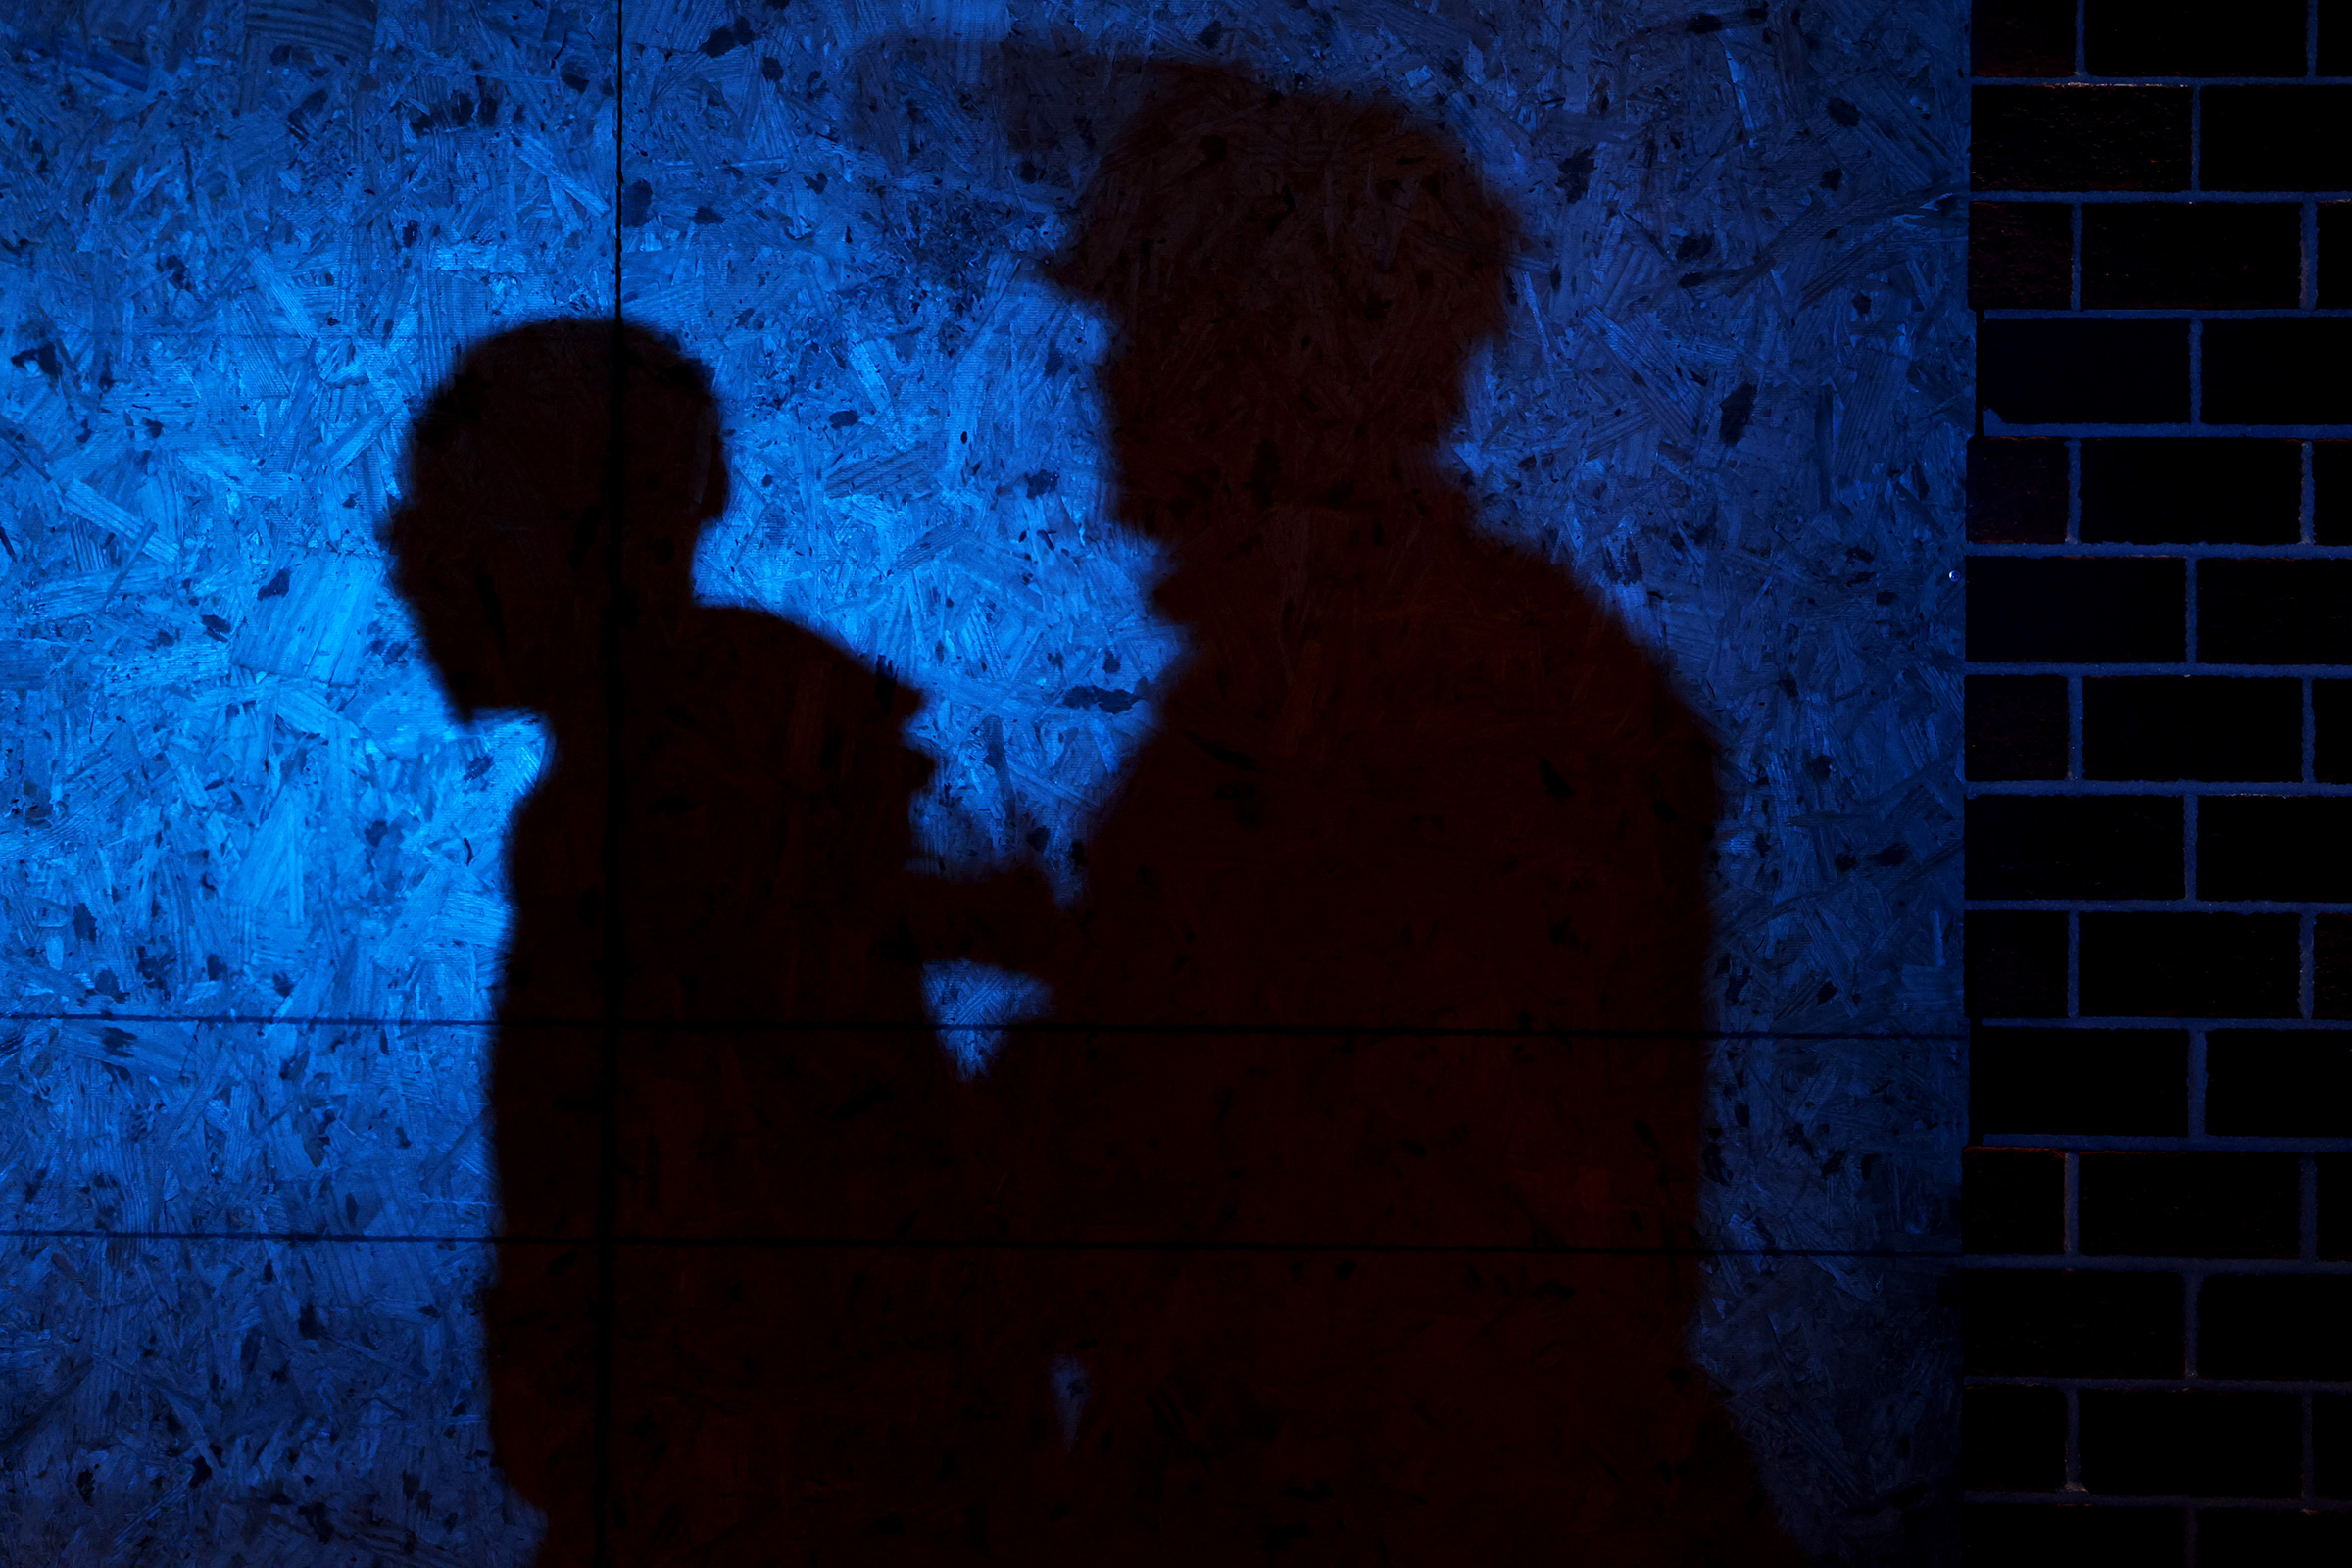 The shadow of a Louisville Police officers arresting a demonstrator is seen on a wall on September 23, 2020 in Louisville, Kentucky. A Kentucky grand jury indicted one police officer involved in the shooting of Breonna Taylor with three counts of wanton endangerment. (Michael M. Santiago—Getty Images)